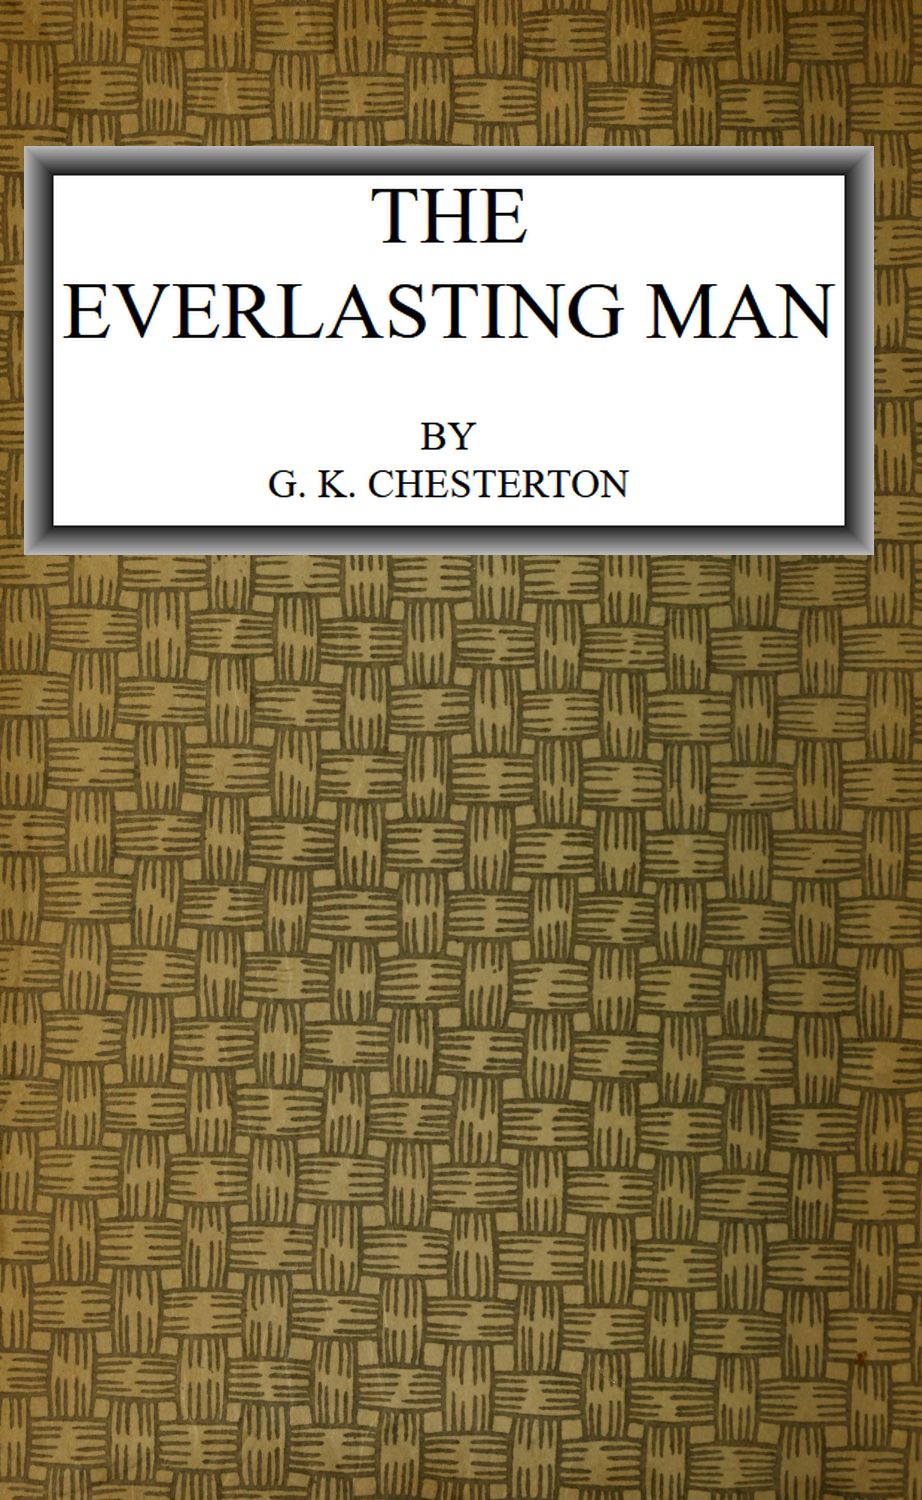 transaction Generous Triathlete The Project Gutenberg eBook of The Everlasting Man, by G. K. Chesterton.